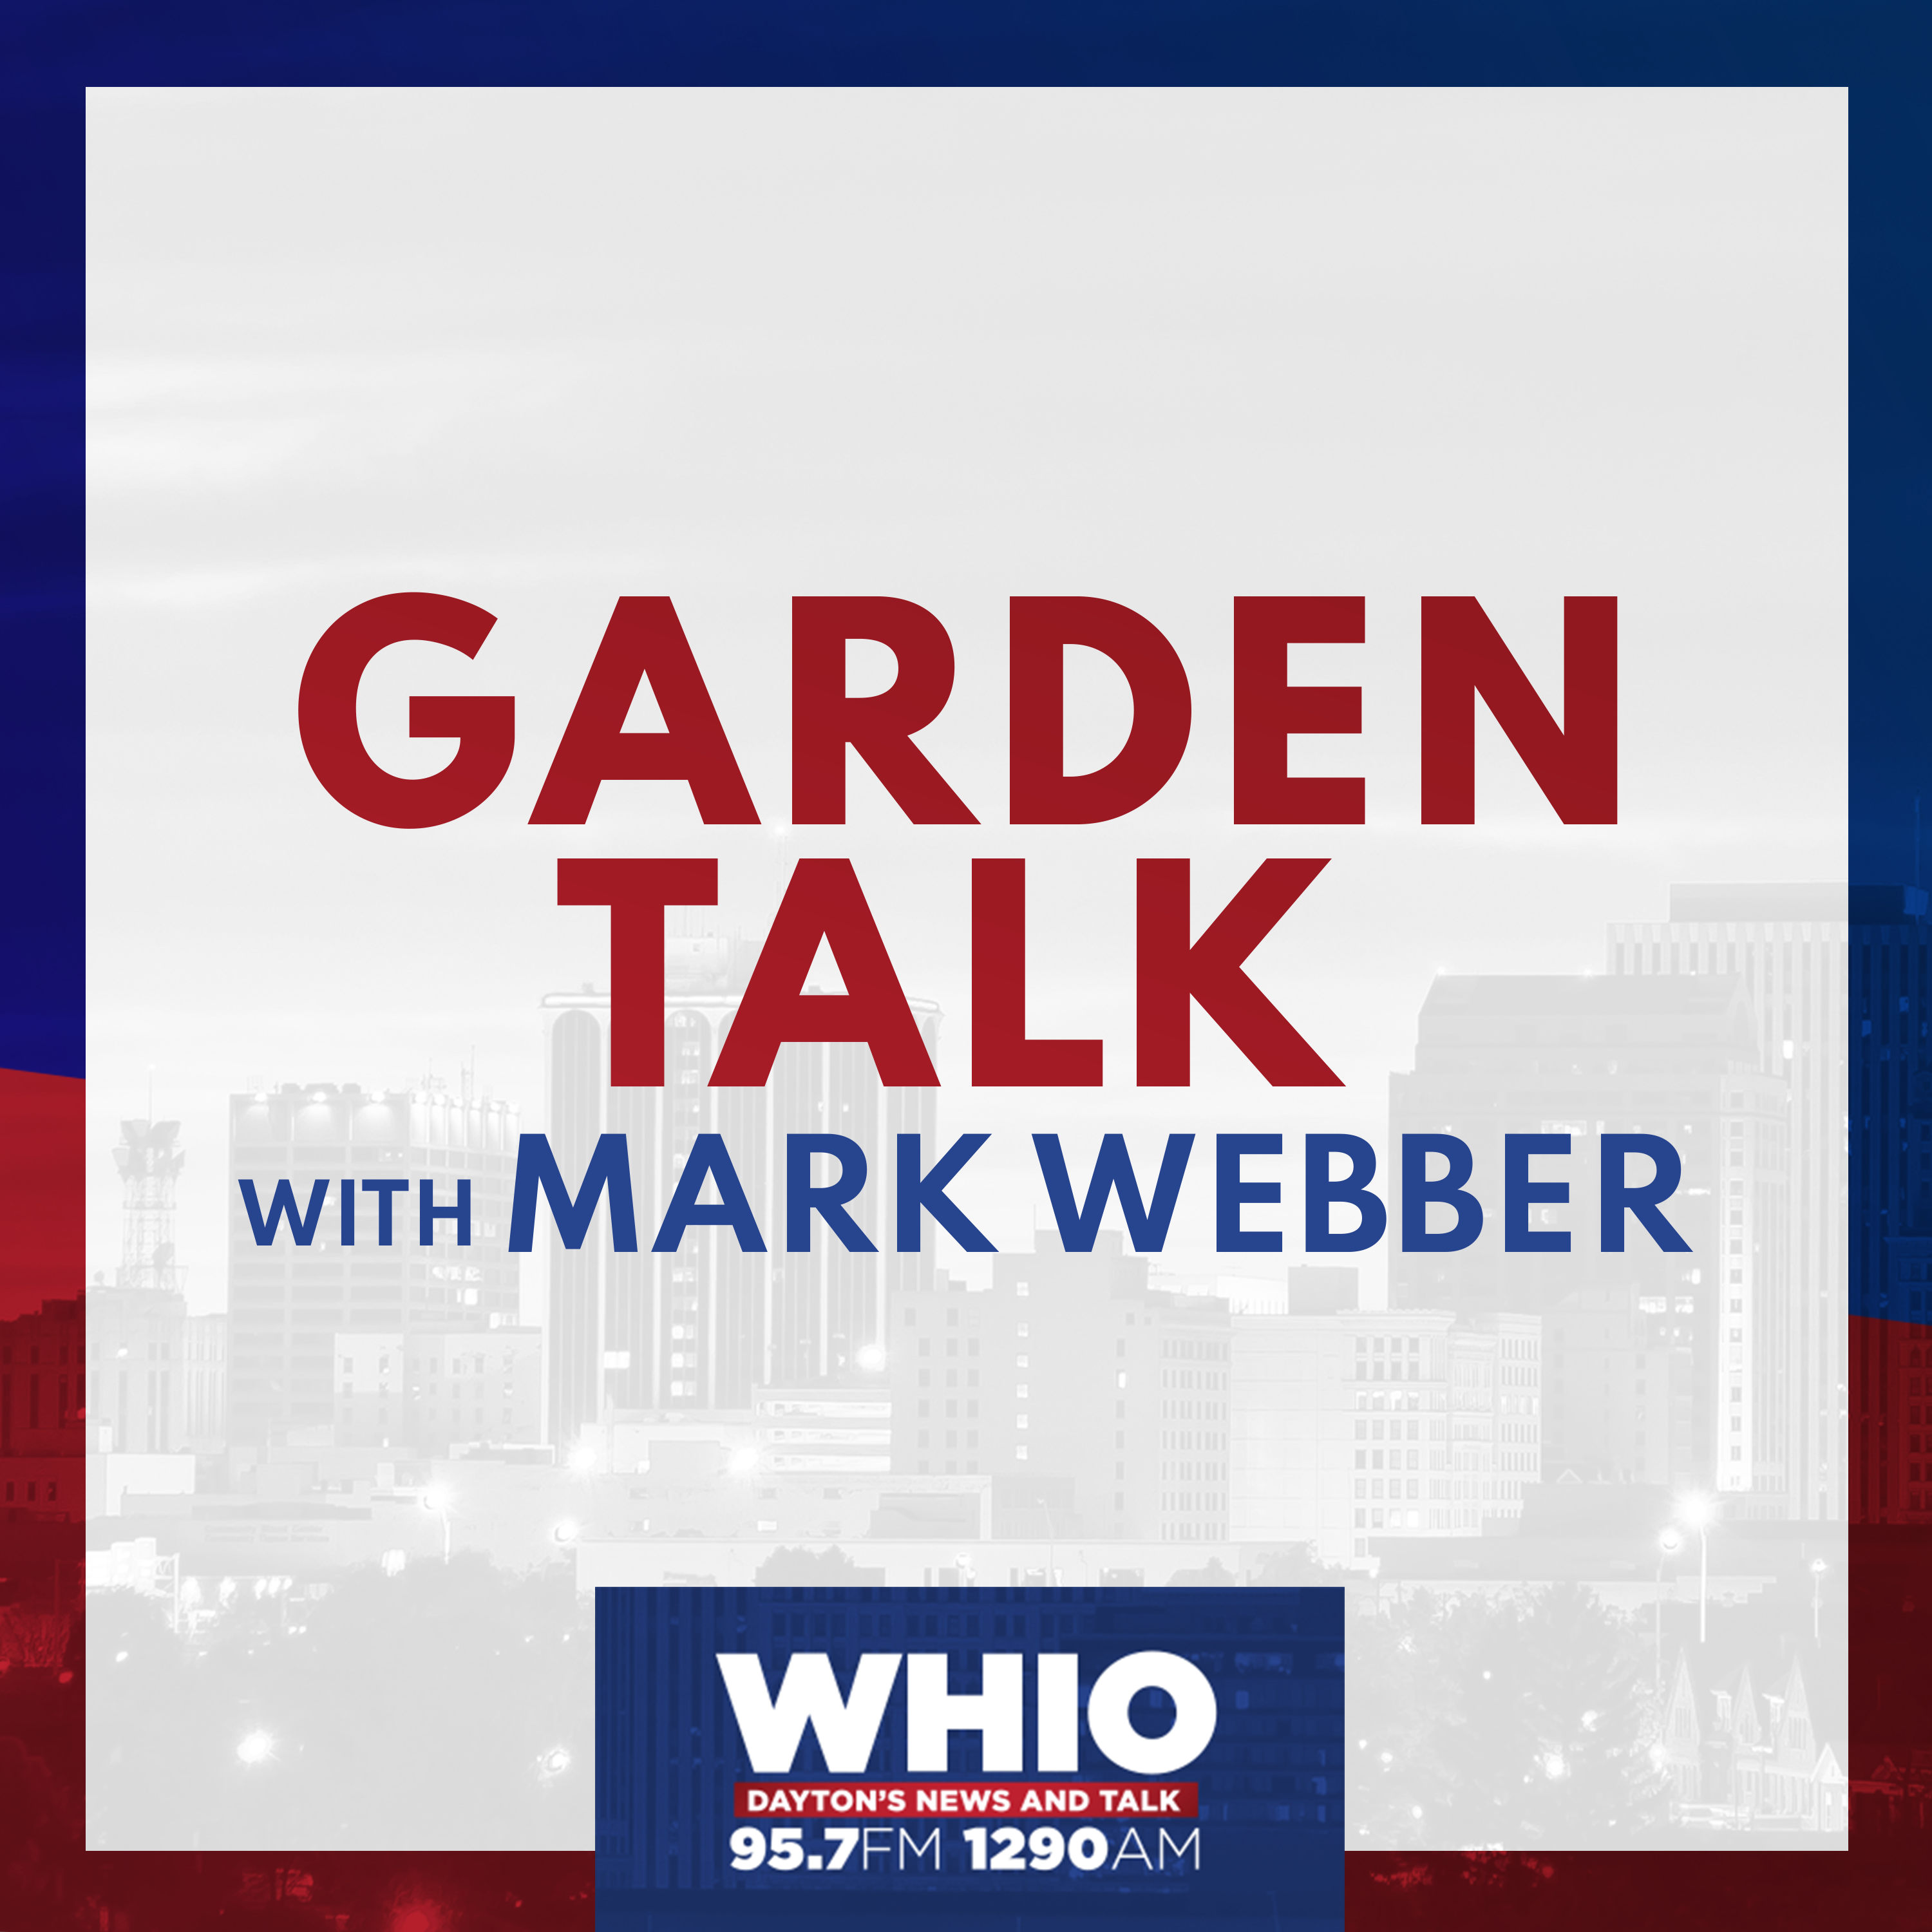 Garden Talk with Mark Webber: Hour 3 from Saturday, September 19th, 2015